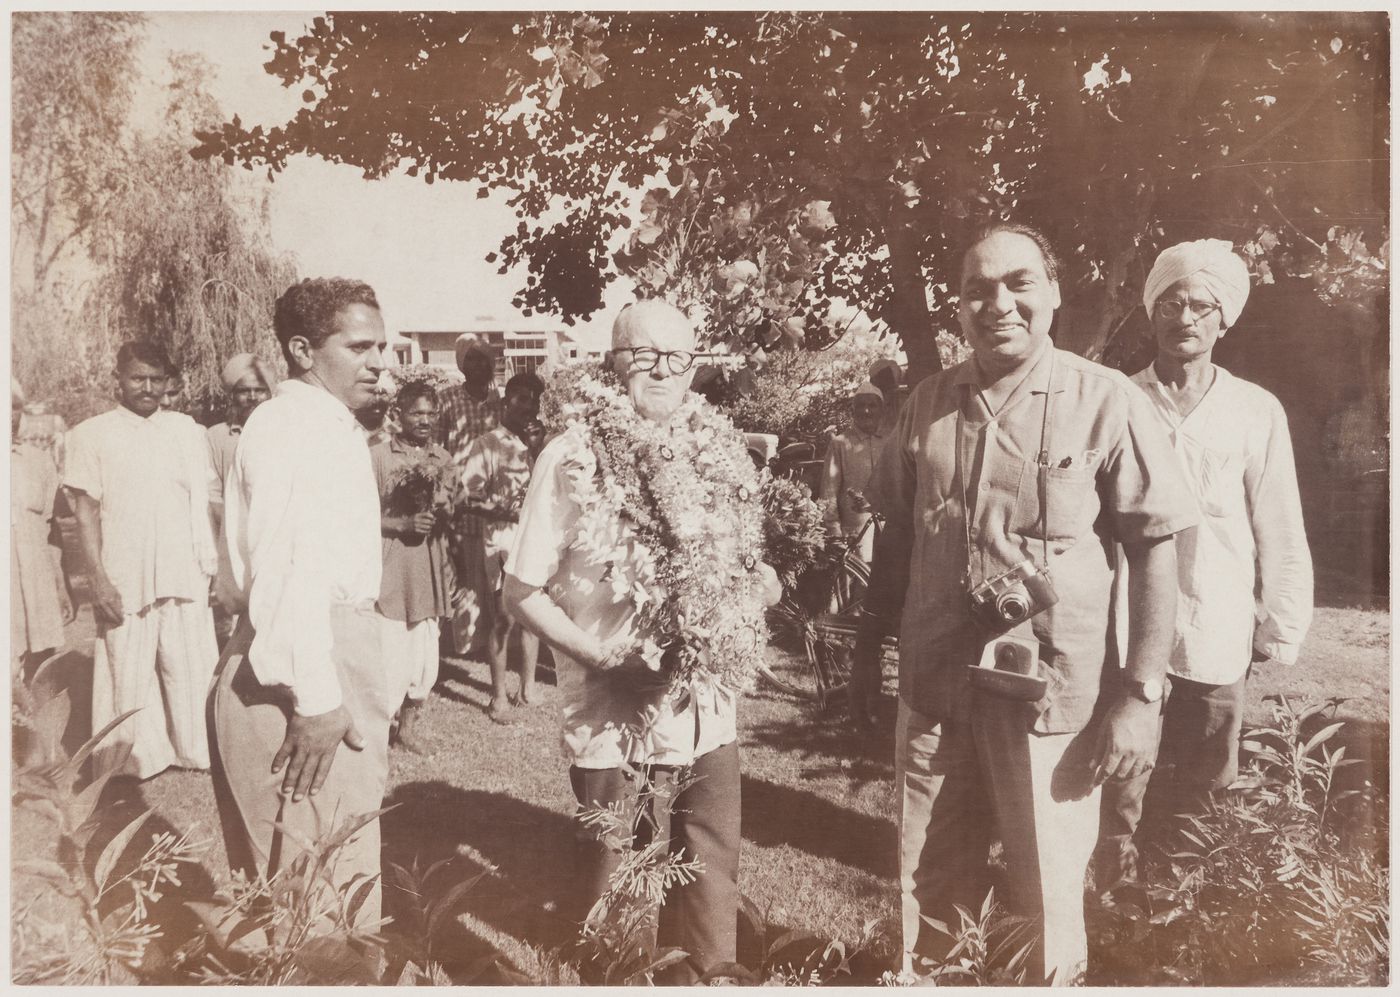 Pierre Jeanneret and unidentified men at Pierre Jeanneret's Farewell Party to Chandigarh in Chandigarh, India